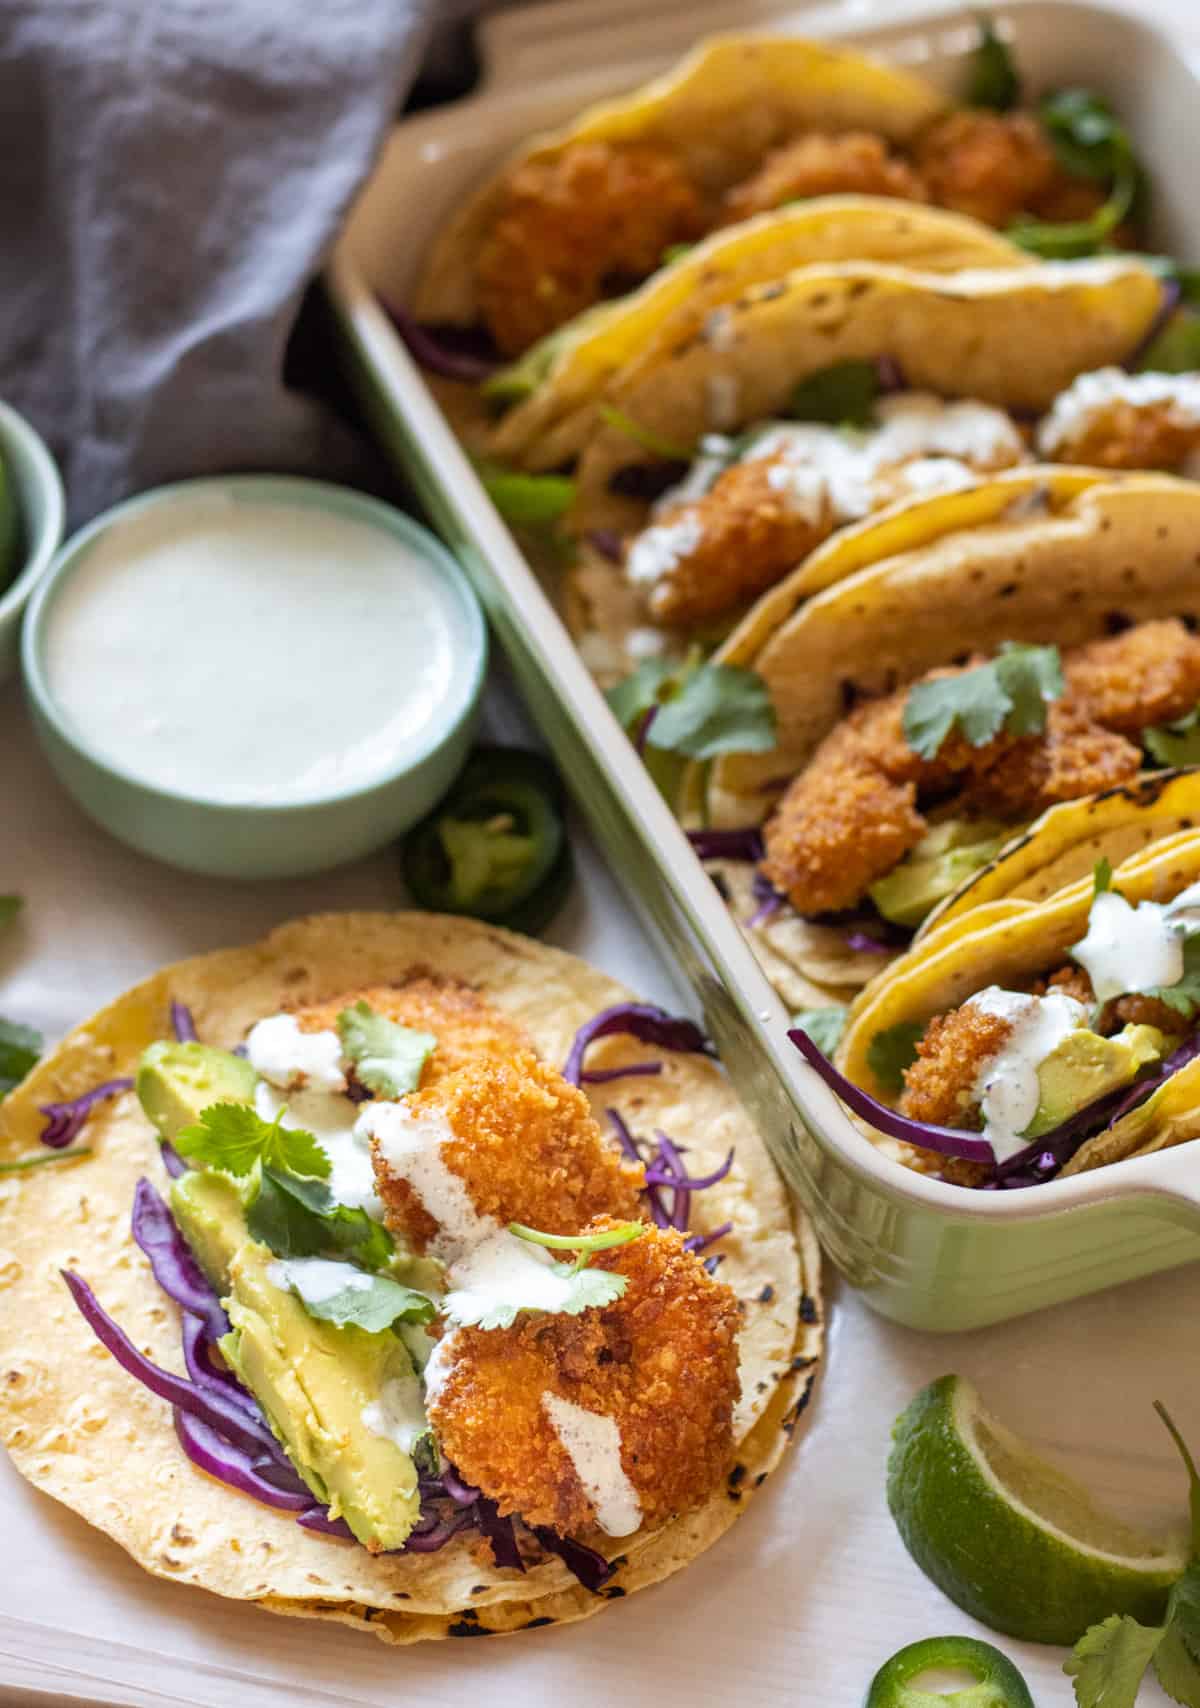 Fried shrimp tacos with purple cabbage and avocado slices lined up in a baking dish with another one laid open next to them.